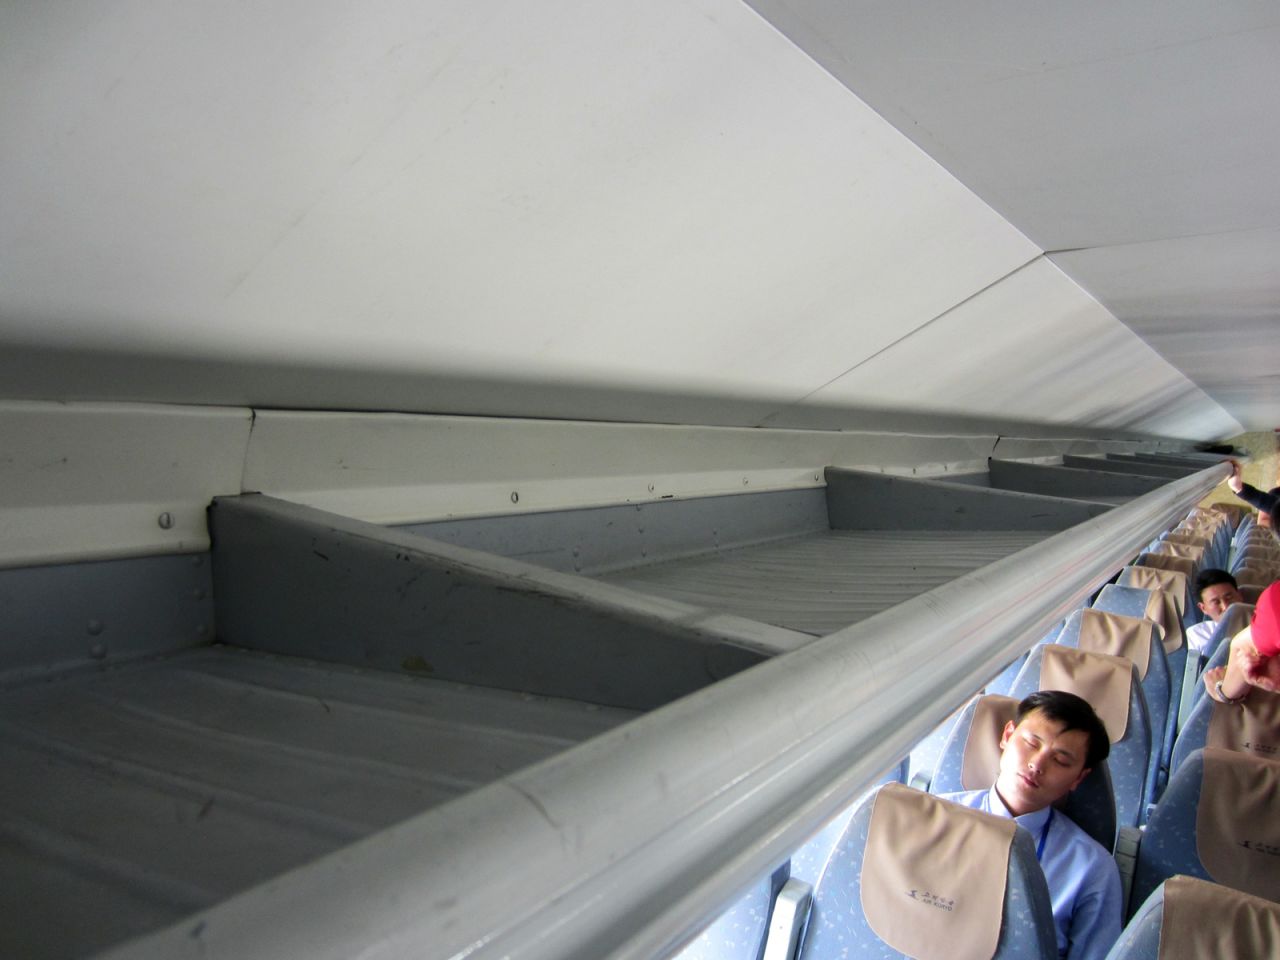 Despite its loud engines, some passengers were able to catch some sleep during the flight. Note the basic design of the plane's overhead storage bins. 